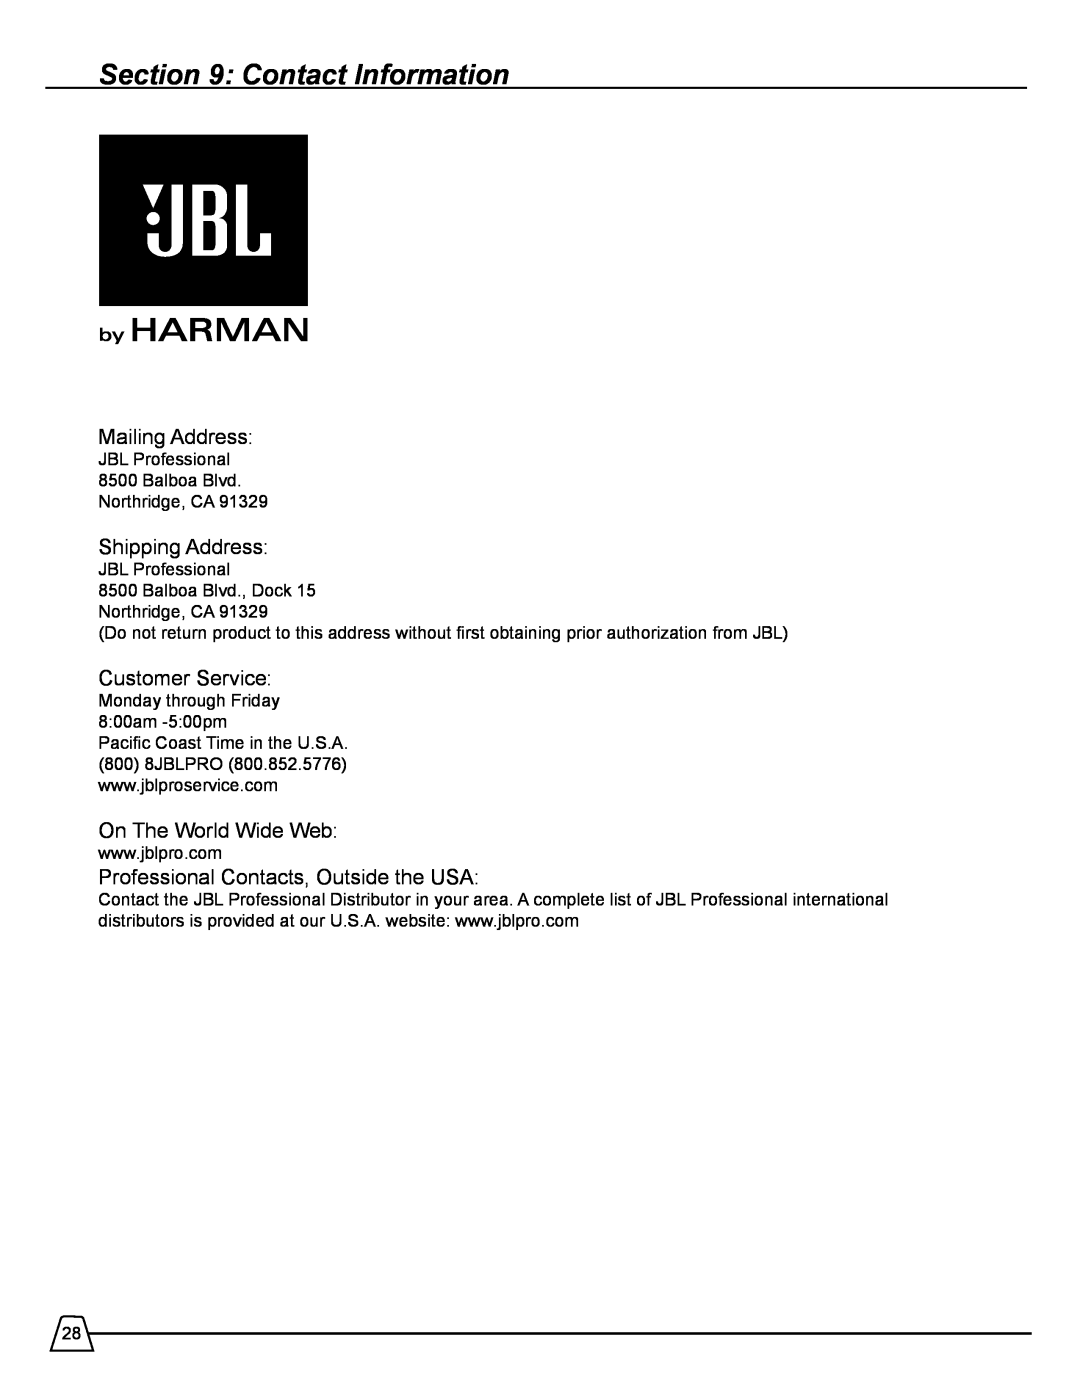 Harman 518S manual Contact Information, Mailing Address, Shipping Address, Customer Service, On The World Wide Web 